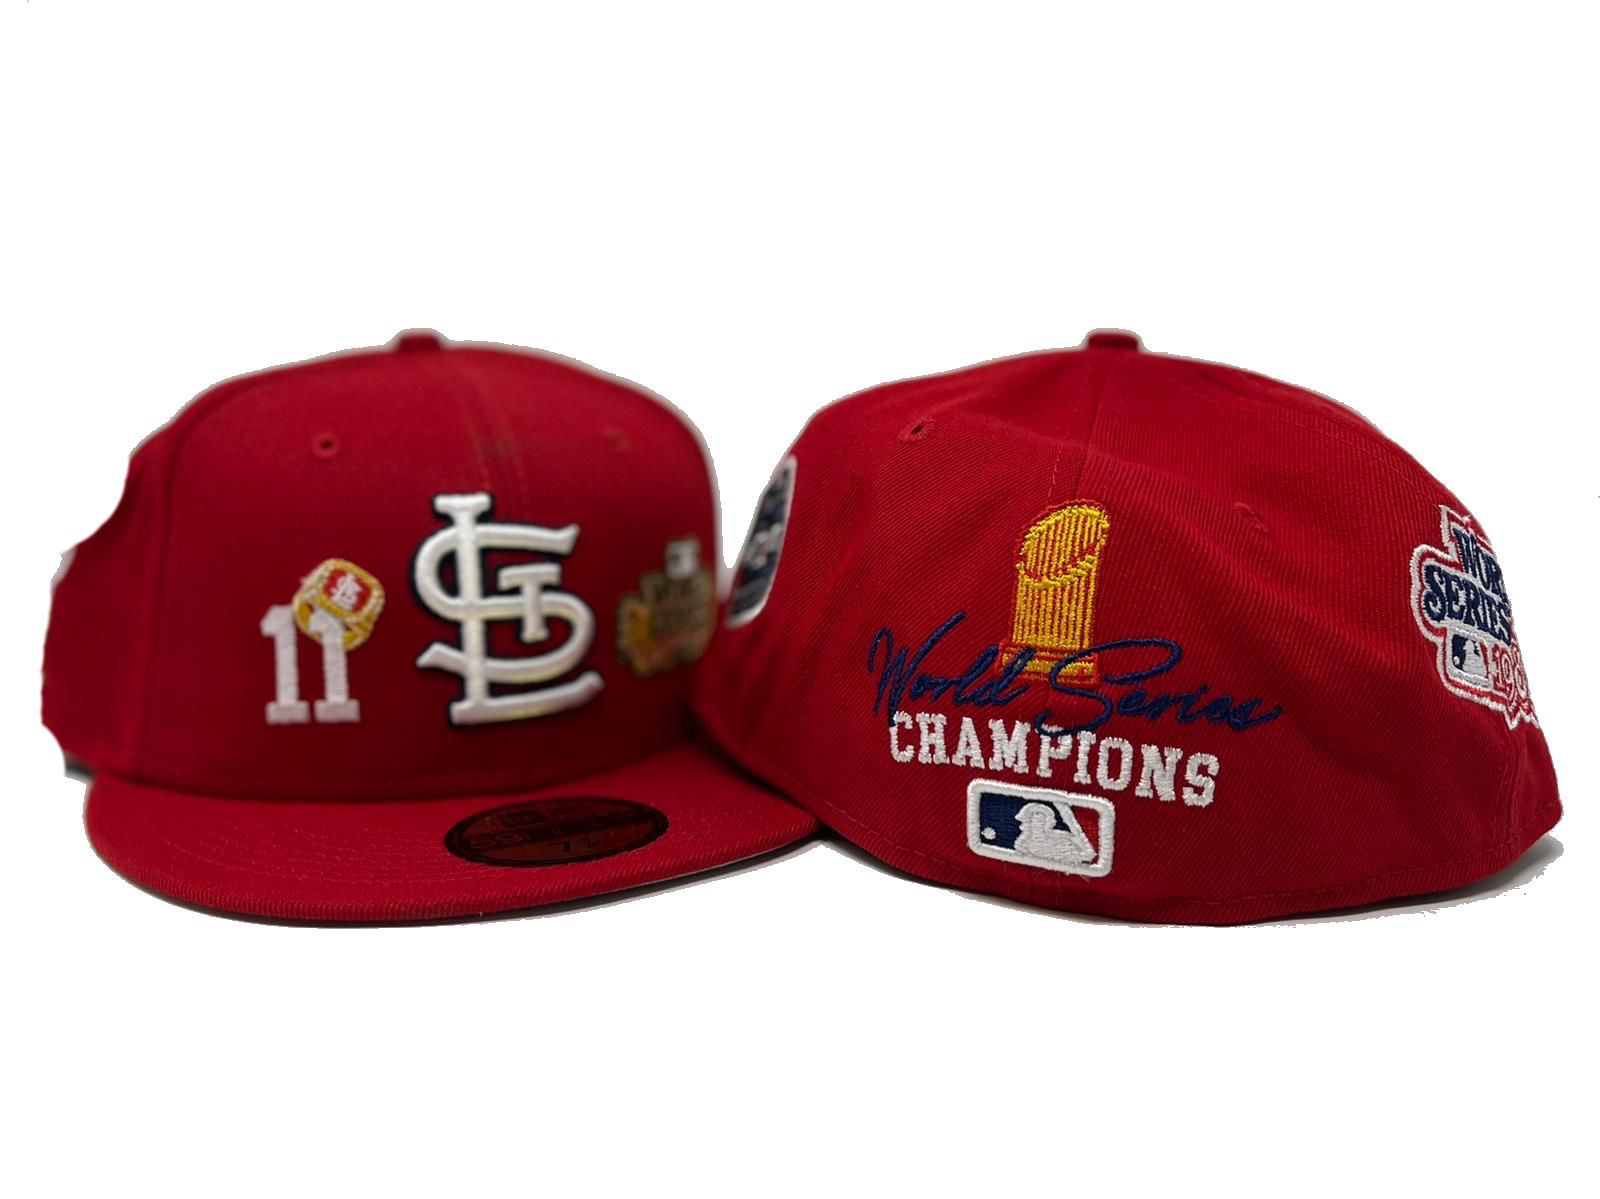 New Era St. Louis Cardinals 11x World Series Champions - Red Groovy Edition  59Fifty Fitted Hat, FITTED HATS, CAPS